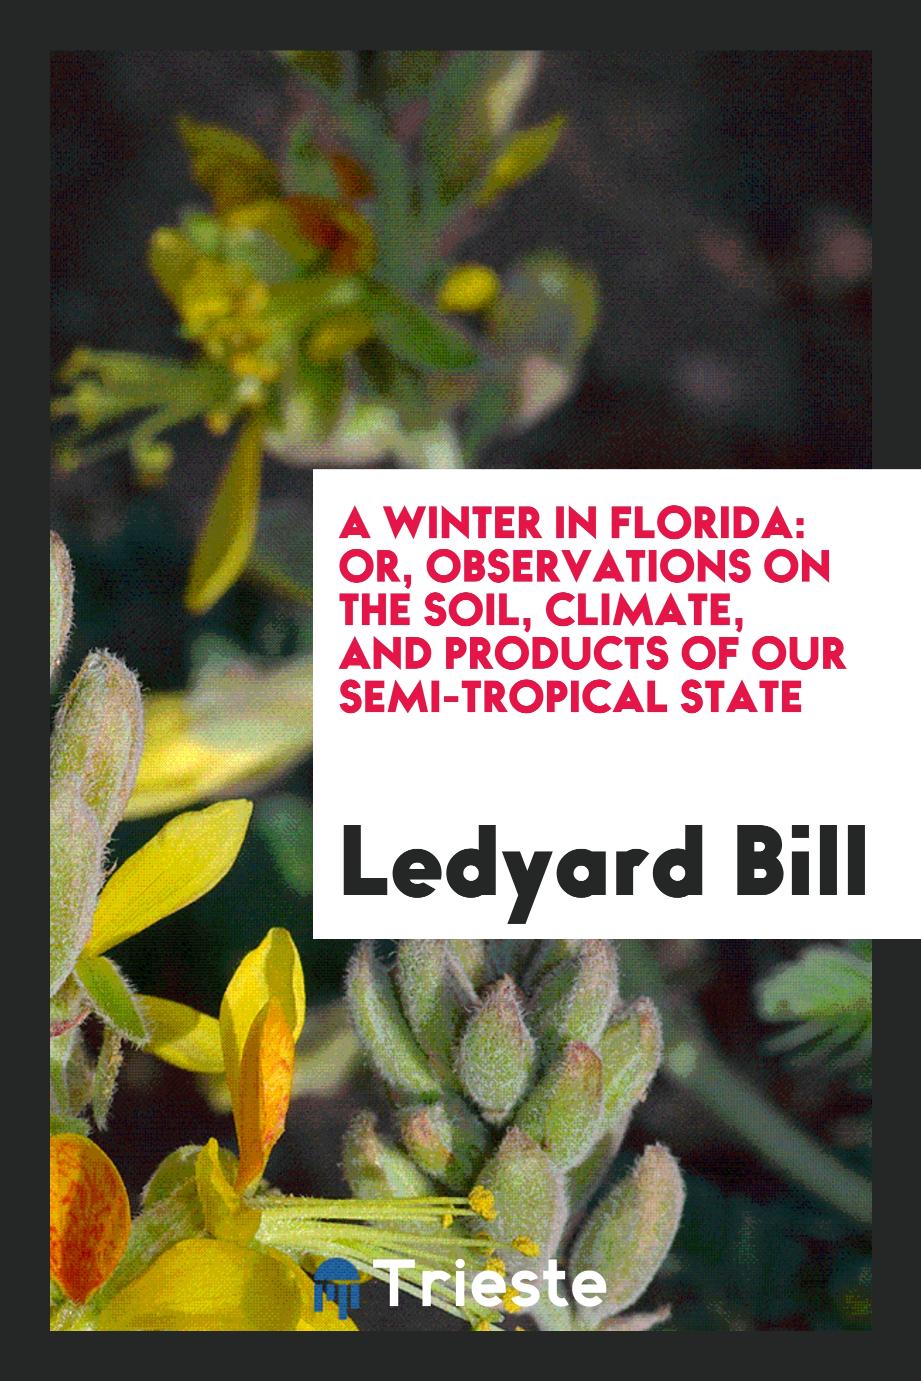 A winter in Florida: or, Observations on the soil, climate, and products of our semi-tropical state